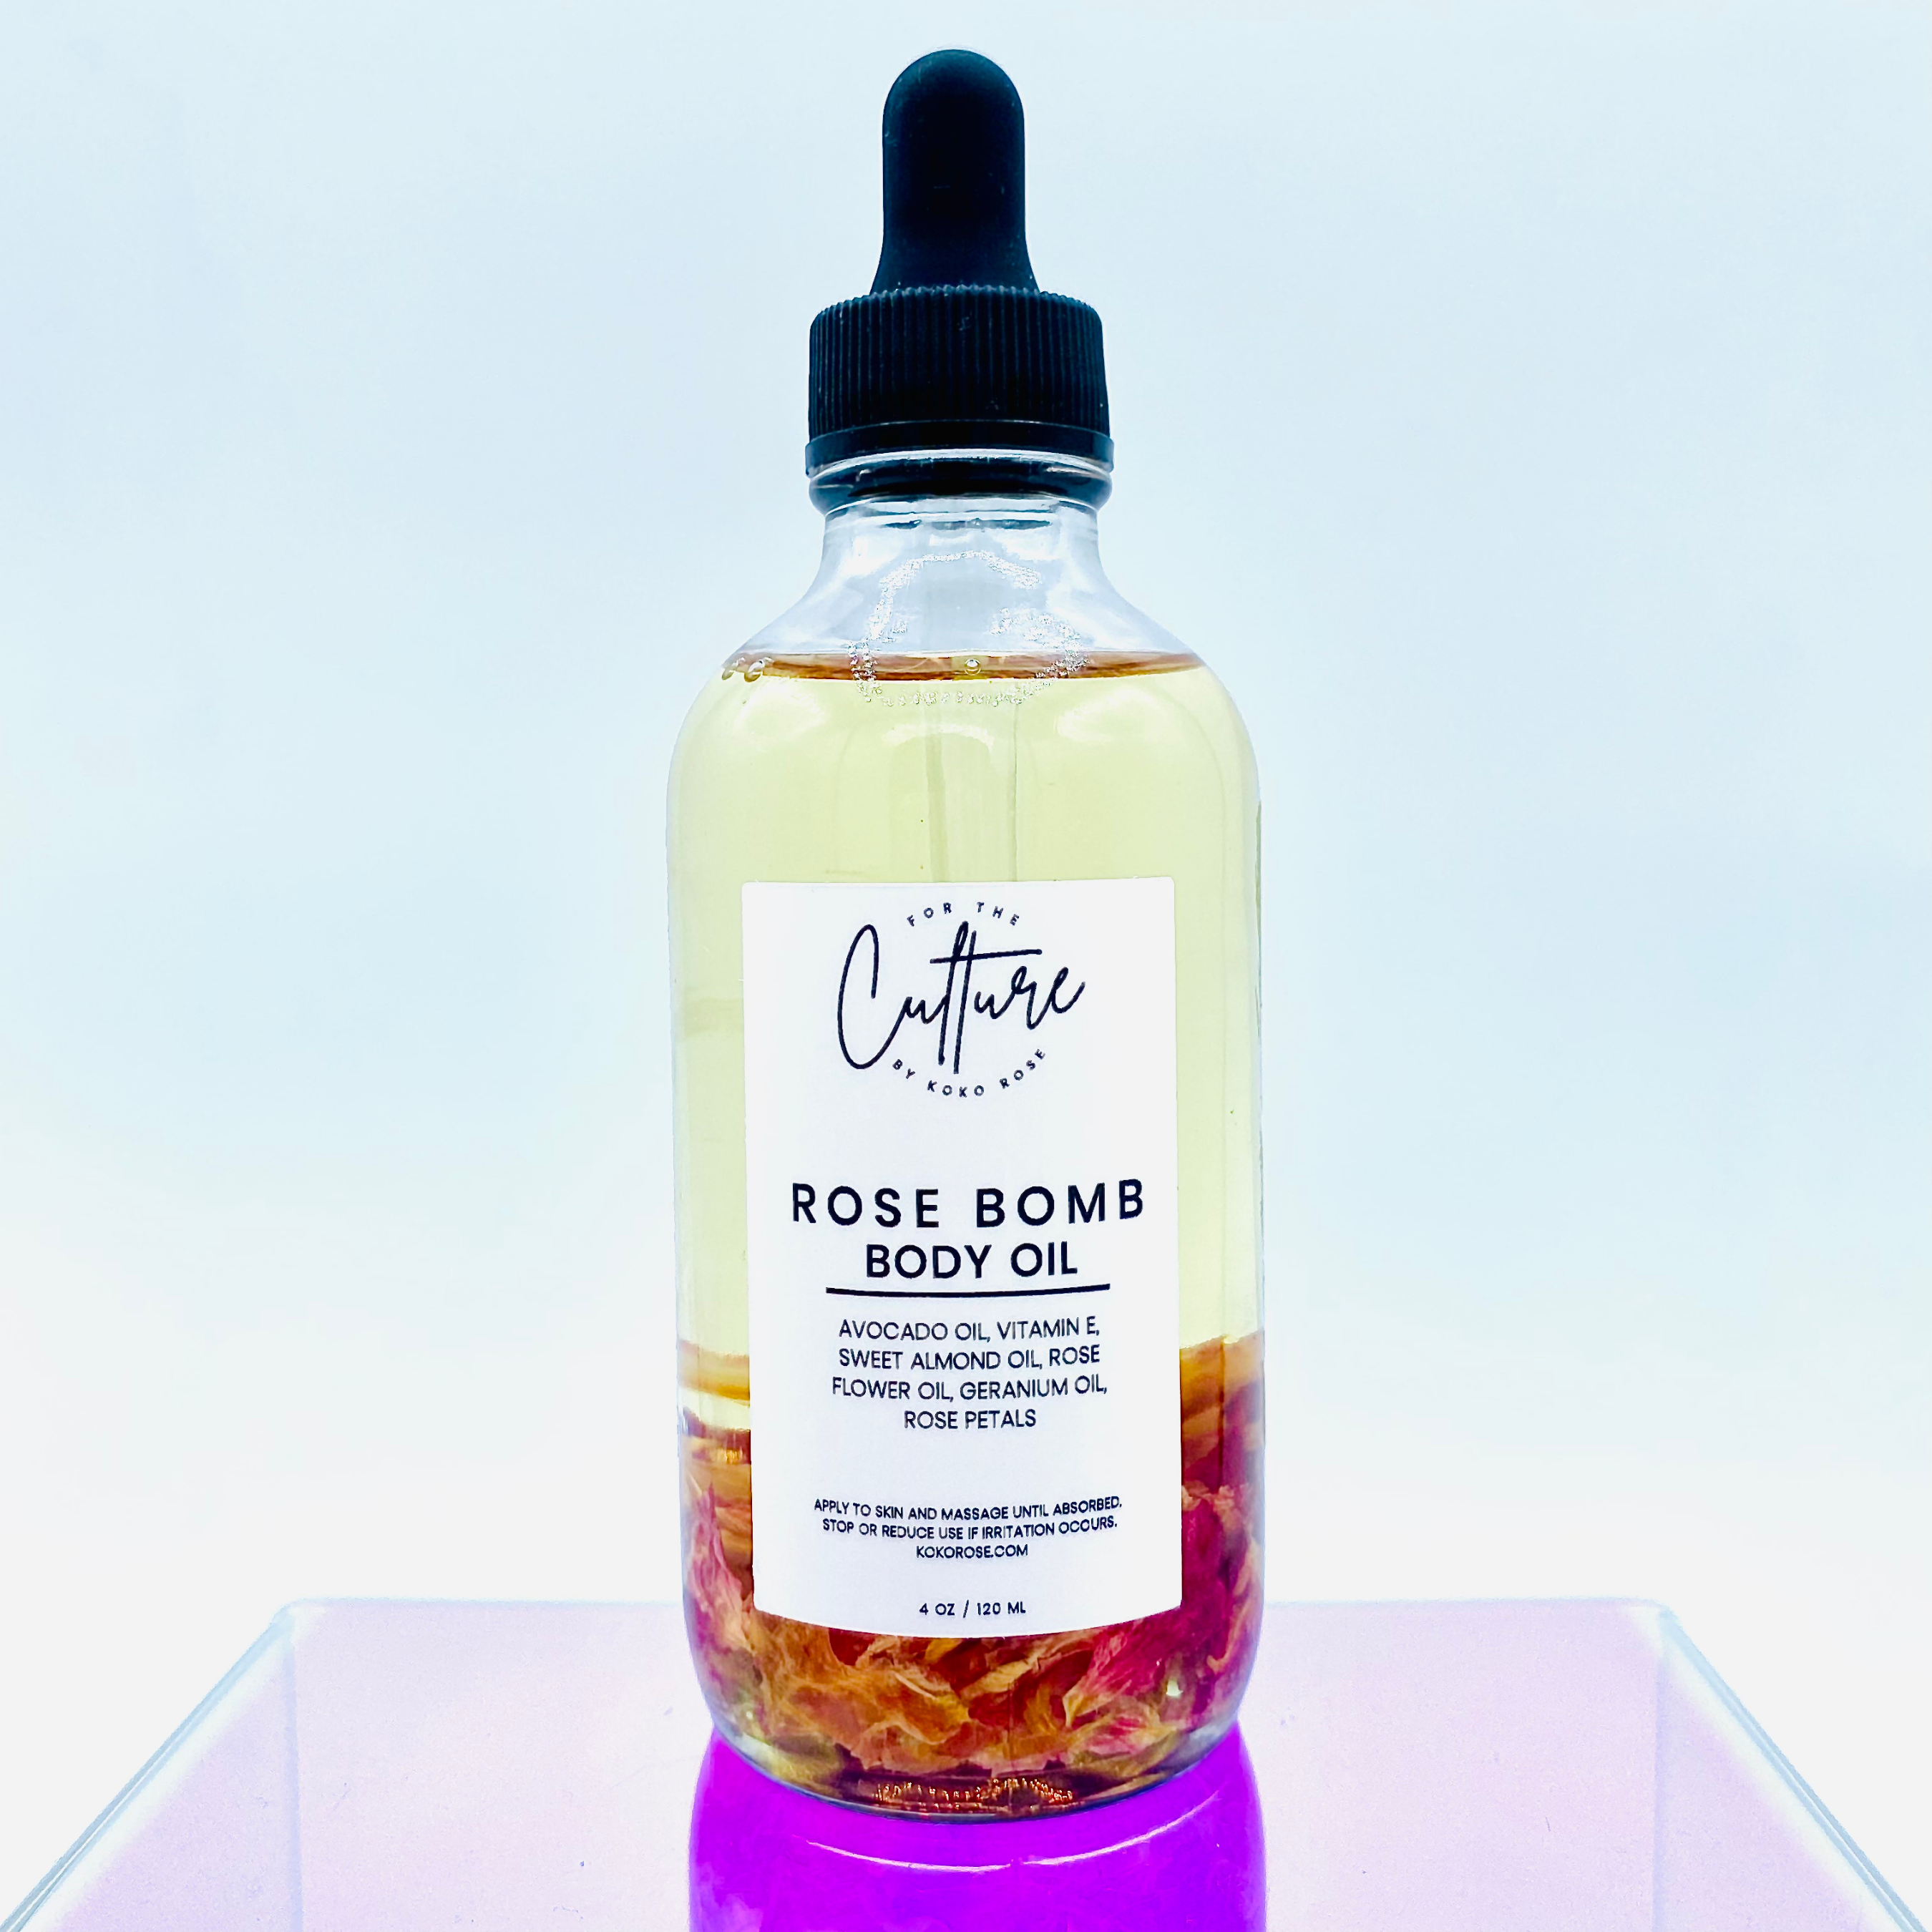 ROSE BOMB INFUSED BODY OIL